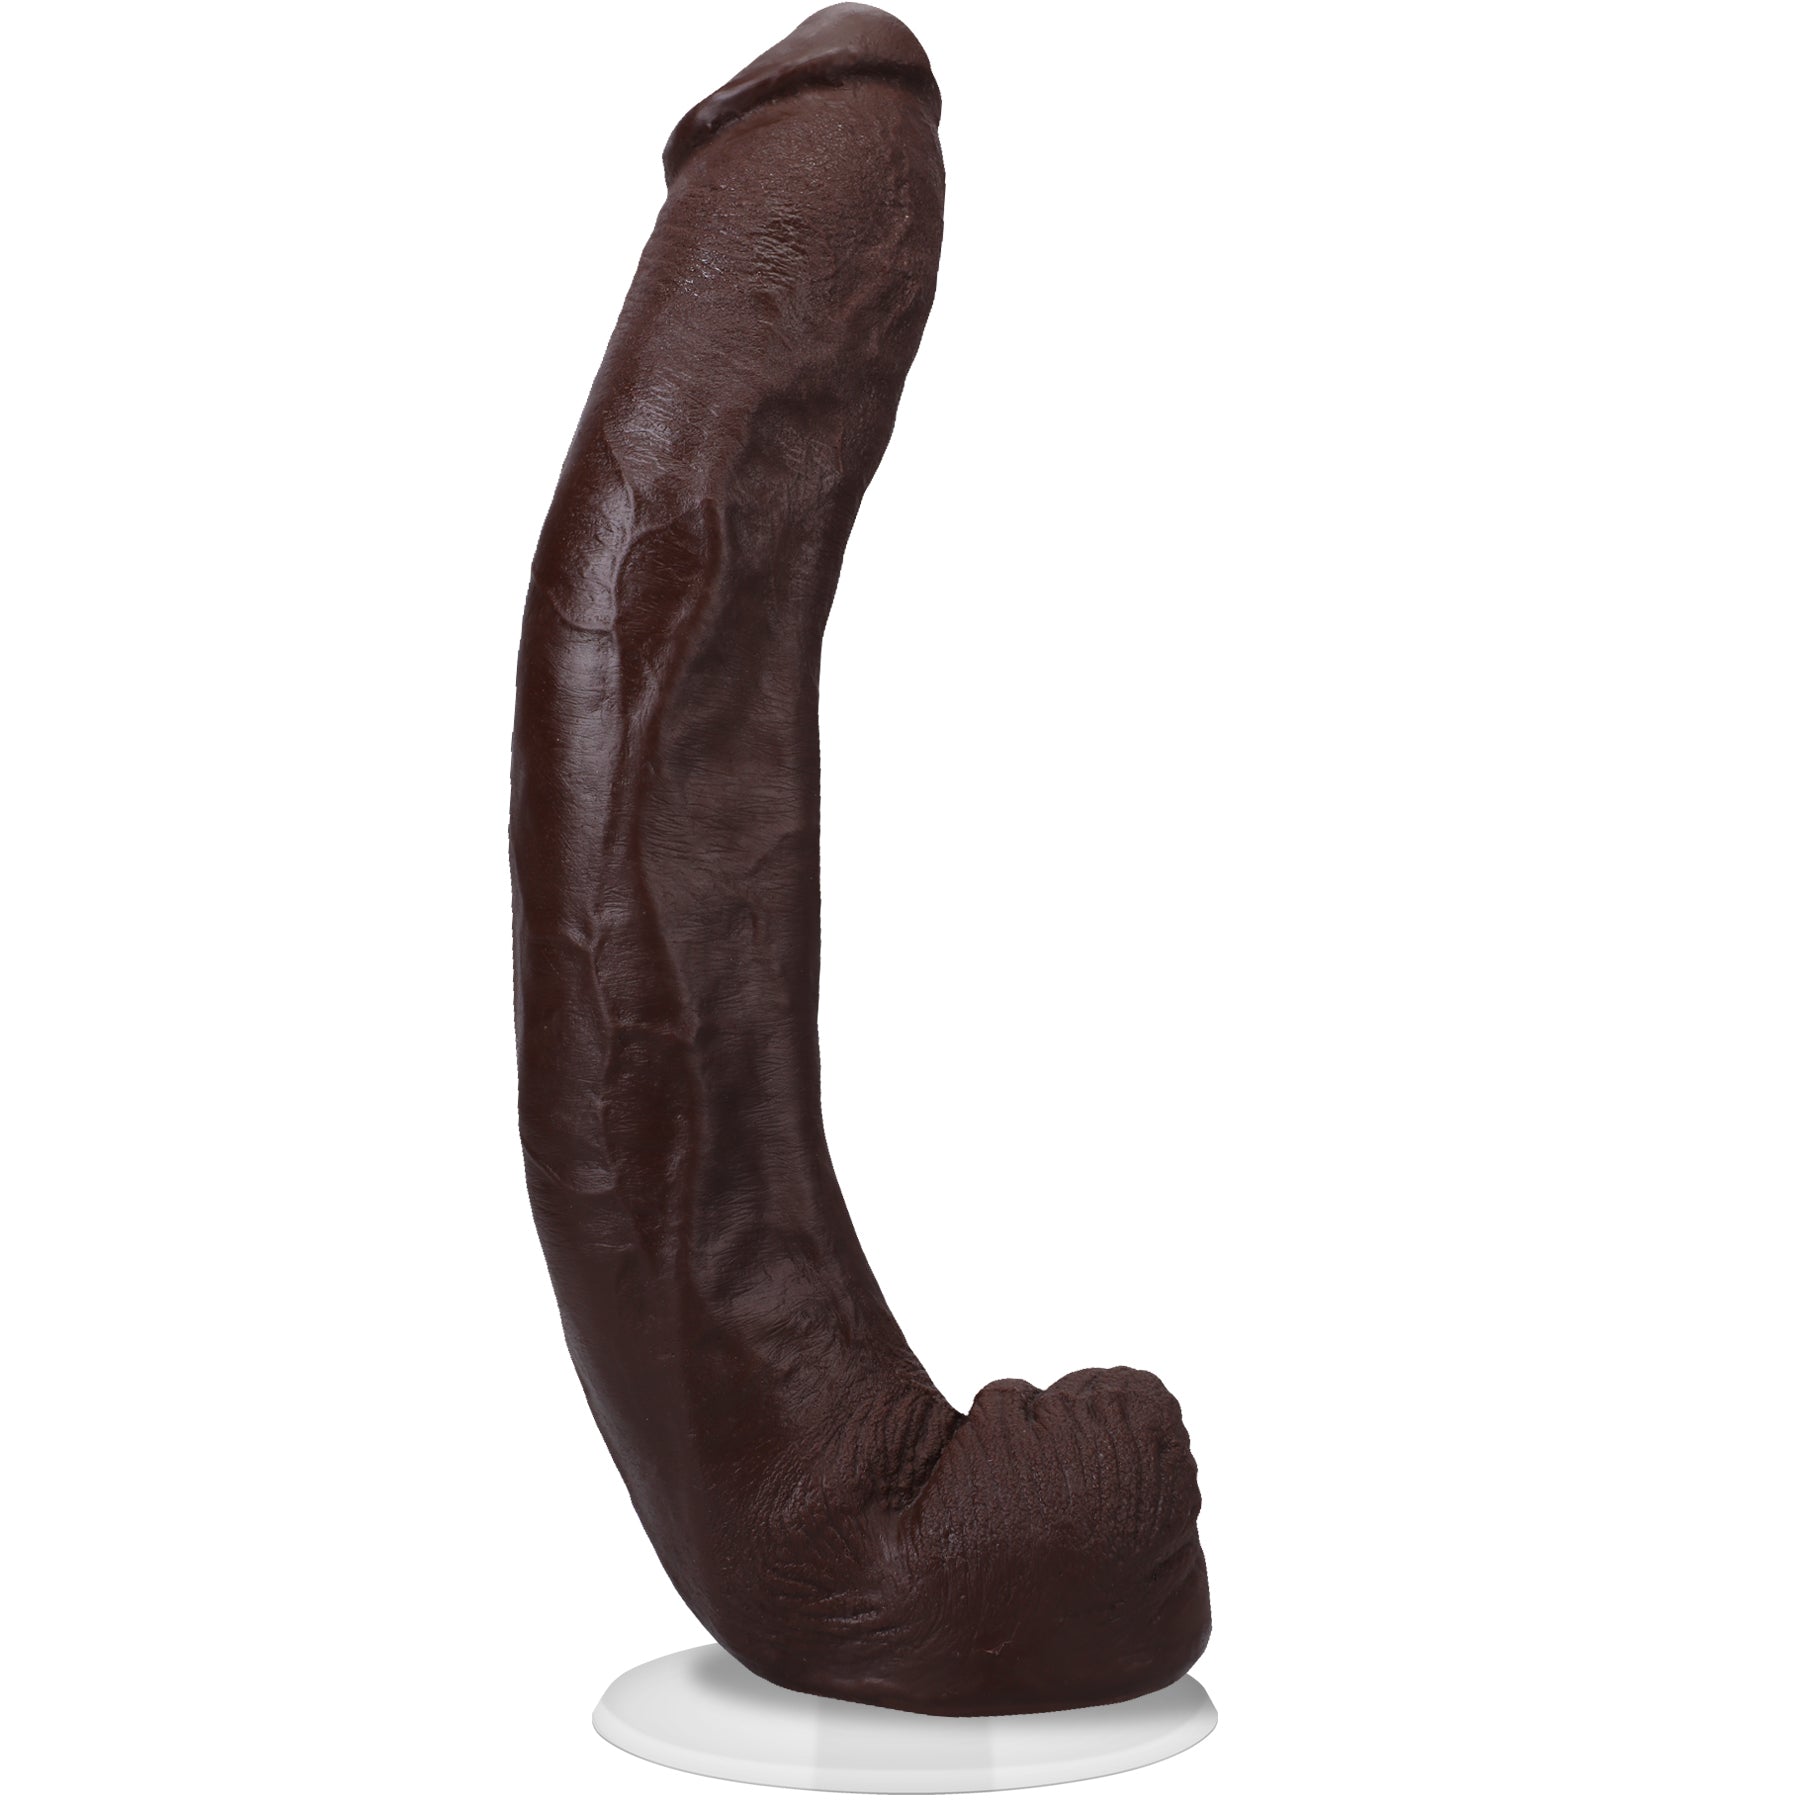 Signature Cocks - Dredd - 13.5 Inch Ultraskyn Cock With Removable Vac-U-Lock Suction Cup - Chocolate-7